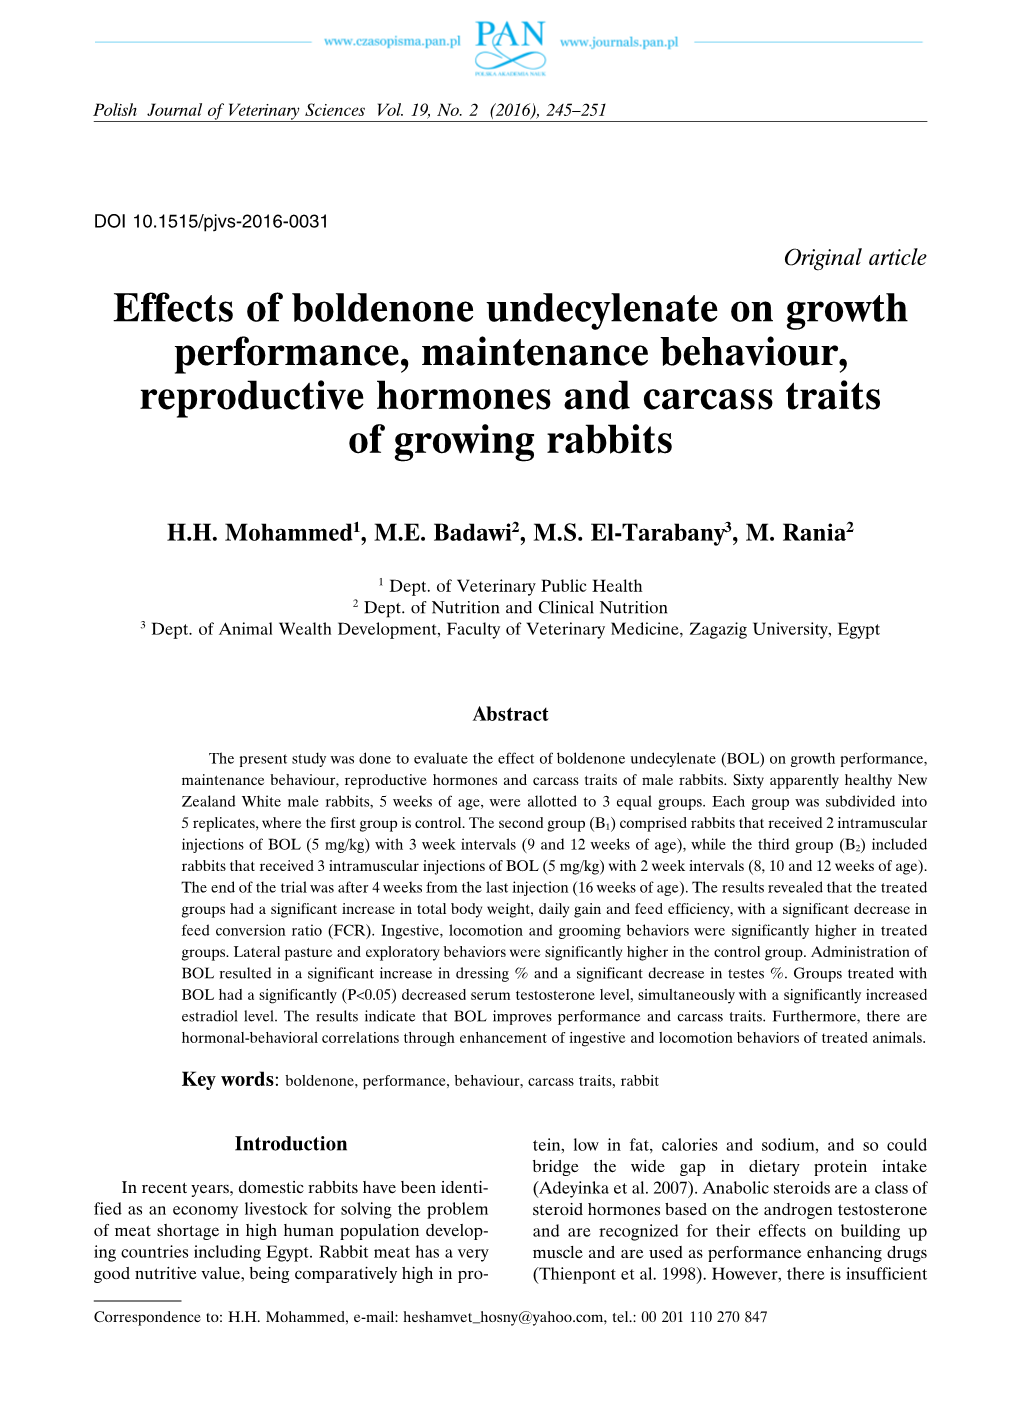 Effects of Boldenone Undecylenate on Growth Performance, Maintenance Behaviour, Reproductive Hormones and Carcass Traits of Growing Rabbits